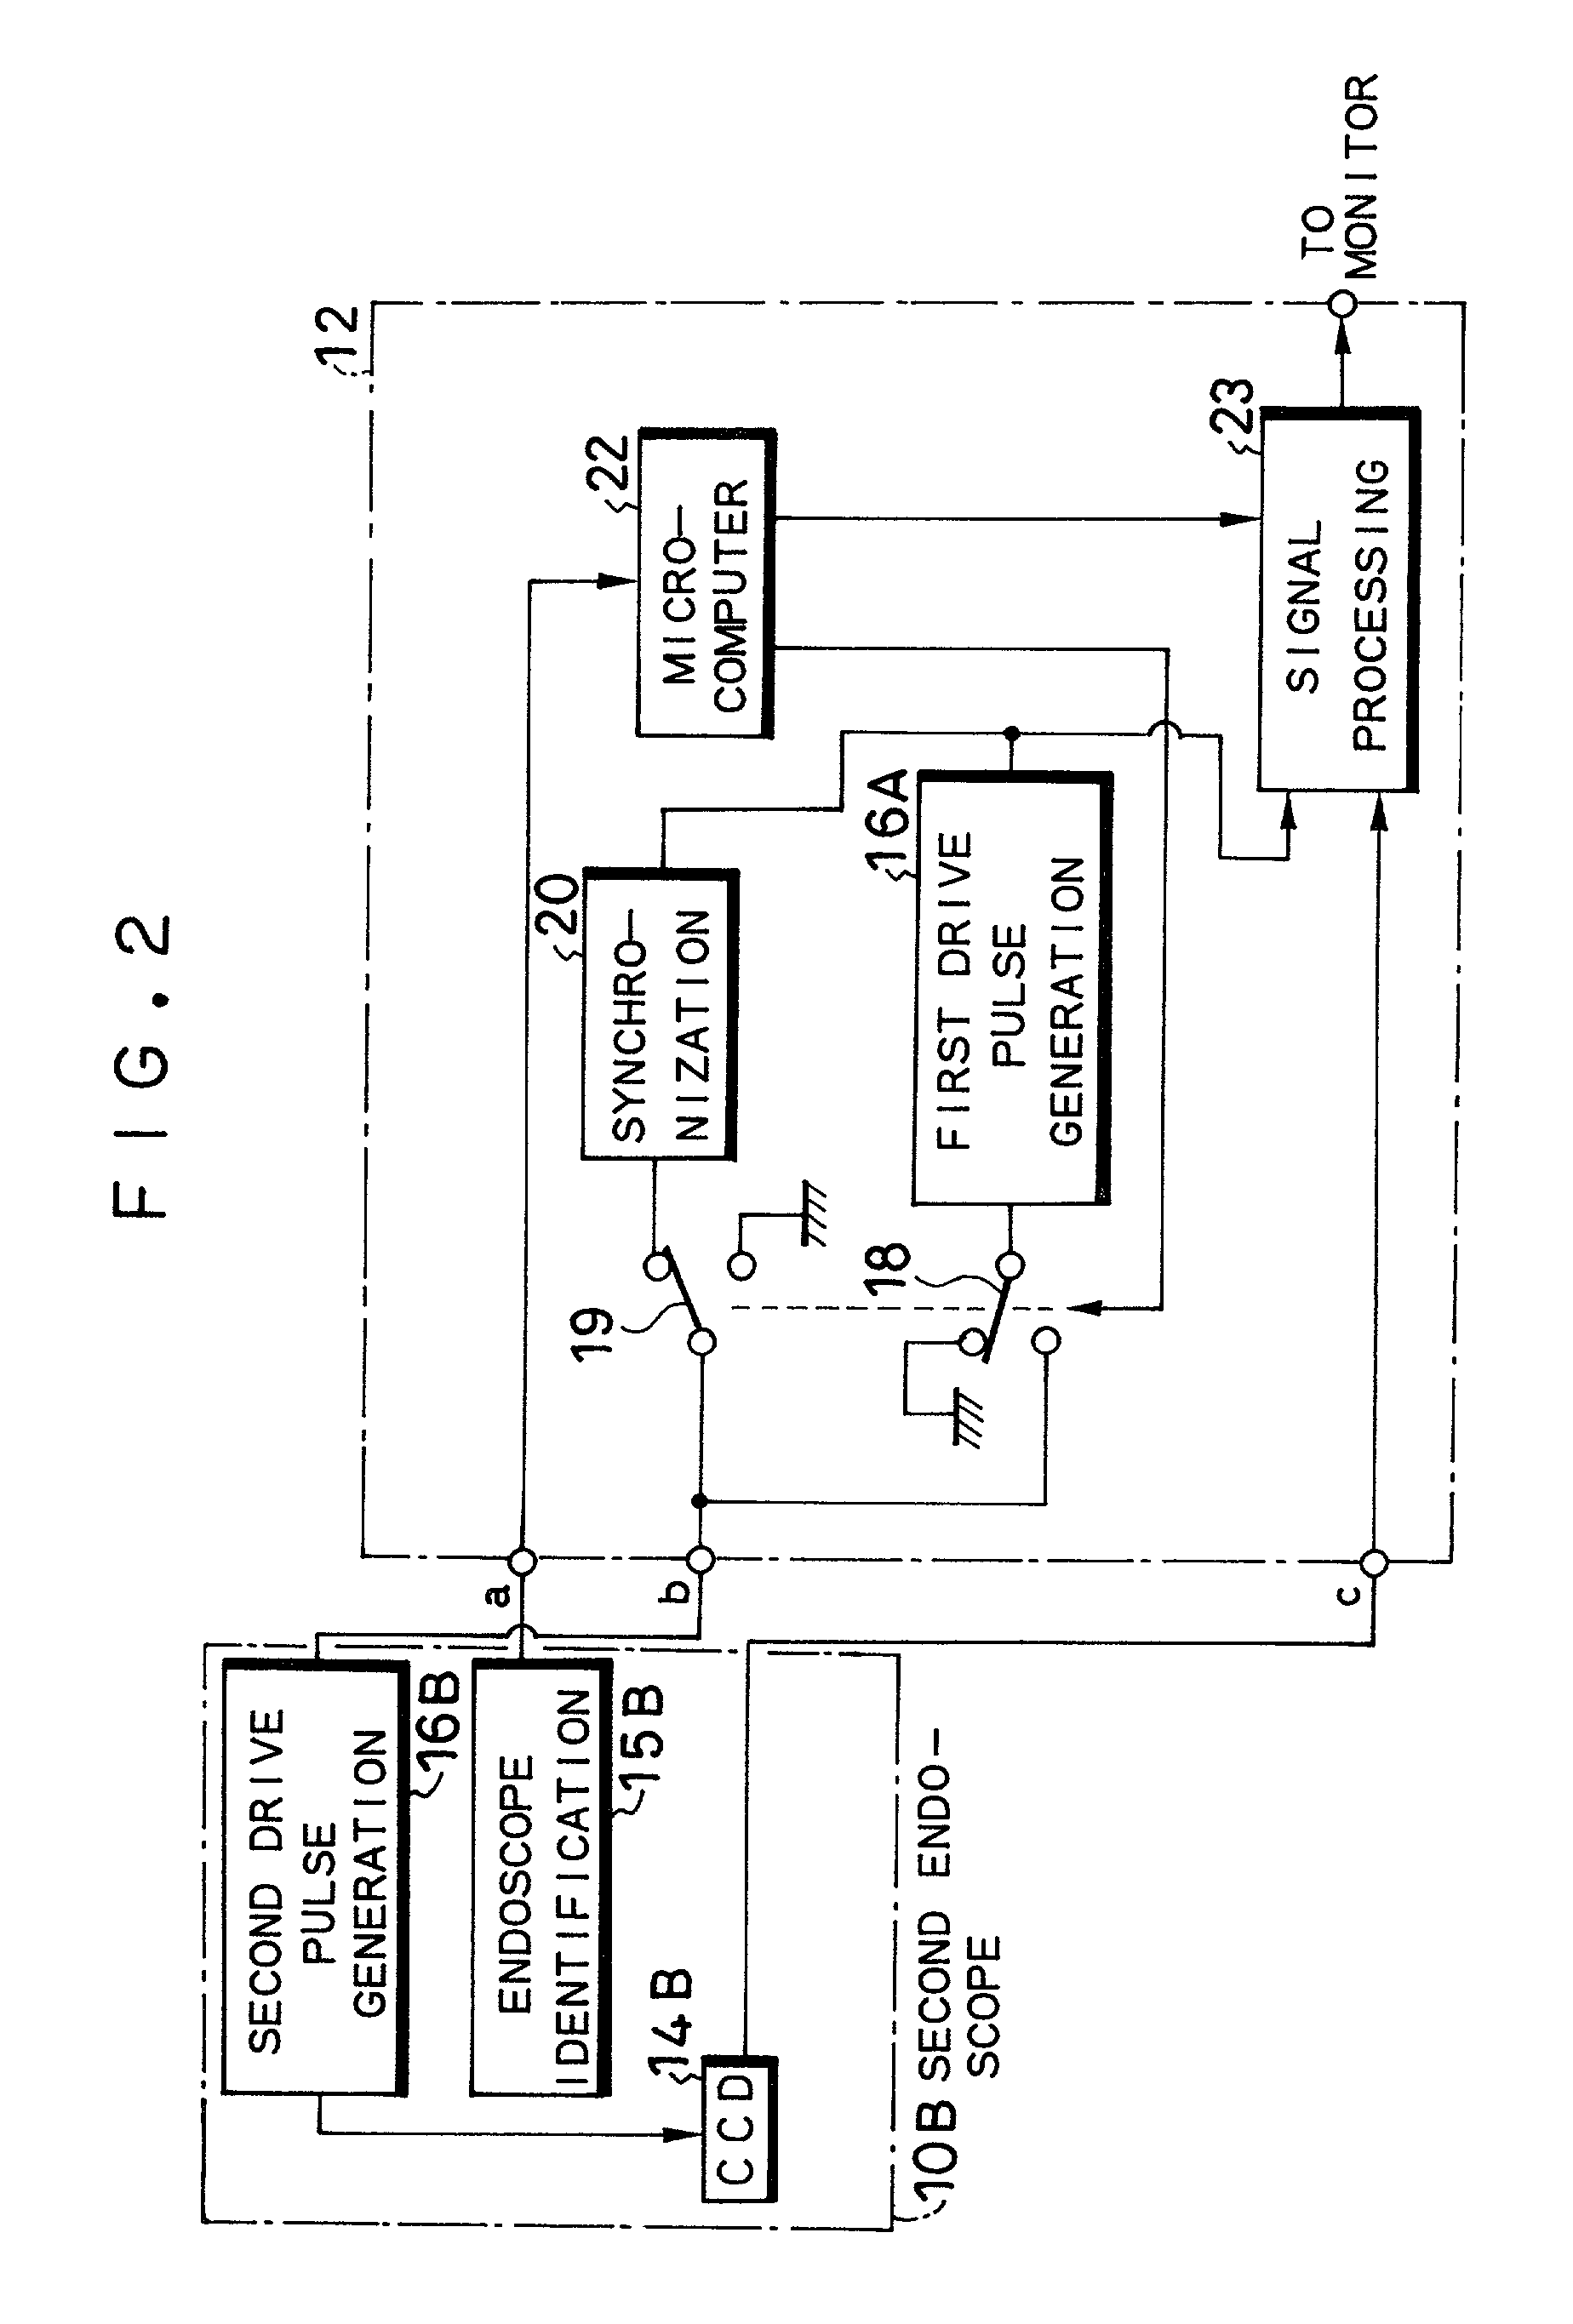 Electronic endoscope apparatus adaptable to endoscopes equipped with imaging device with different pixel density